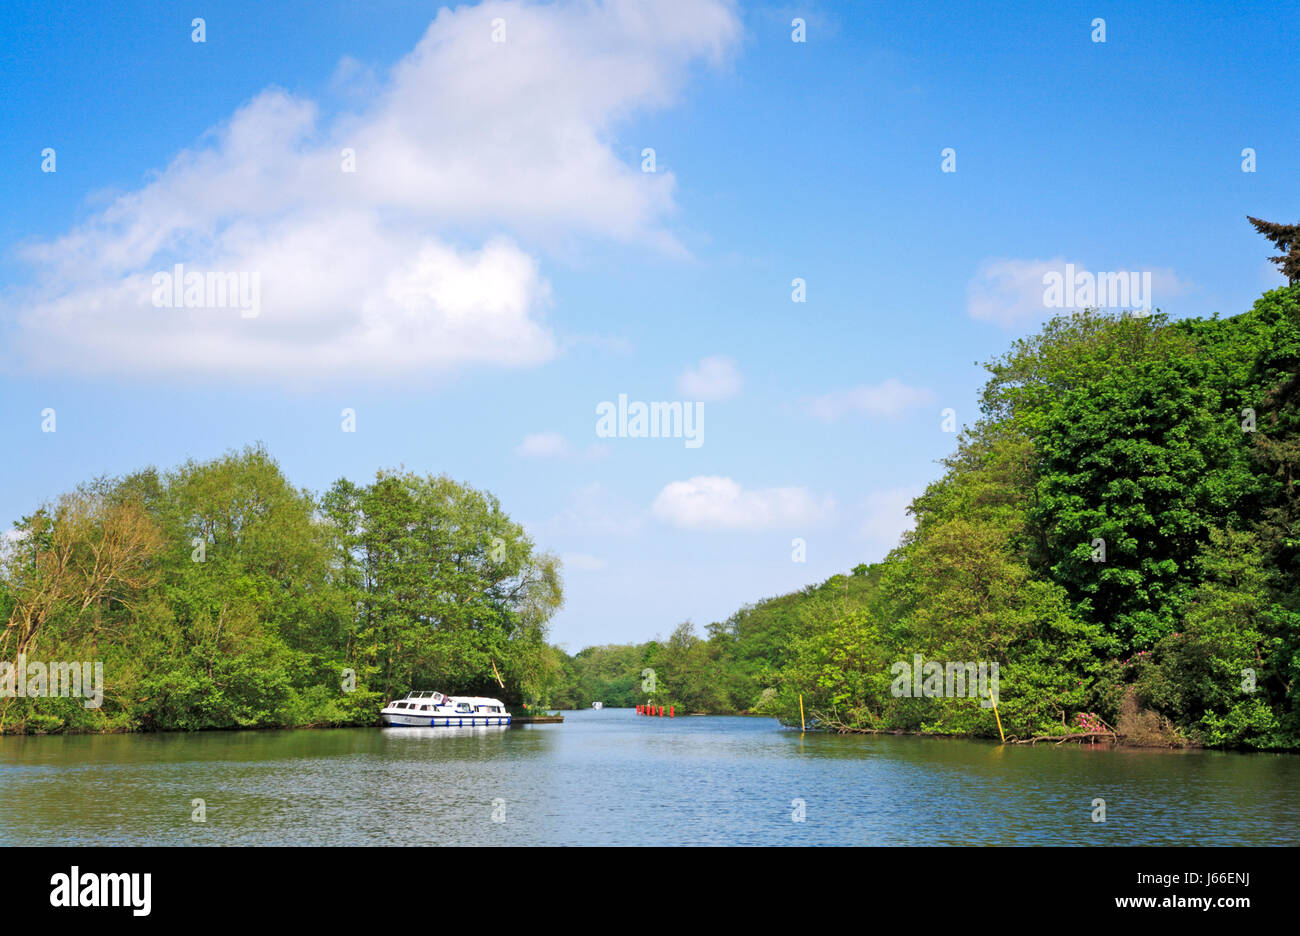 A view of the channel from Salhouse Broad to the River Bure on the Norfolk Broads at Salhouse, Norfolk, England, United Kingdom. Stock Photo